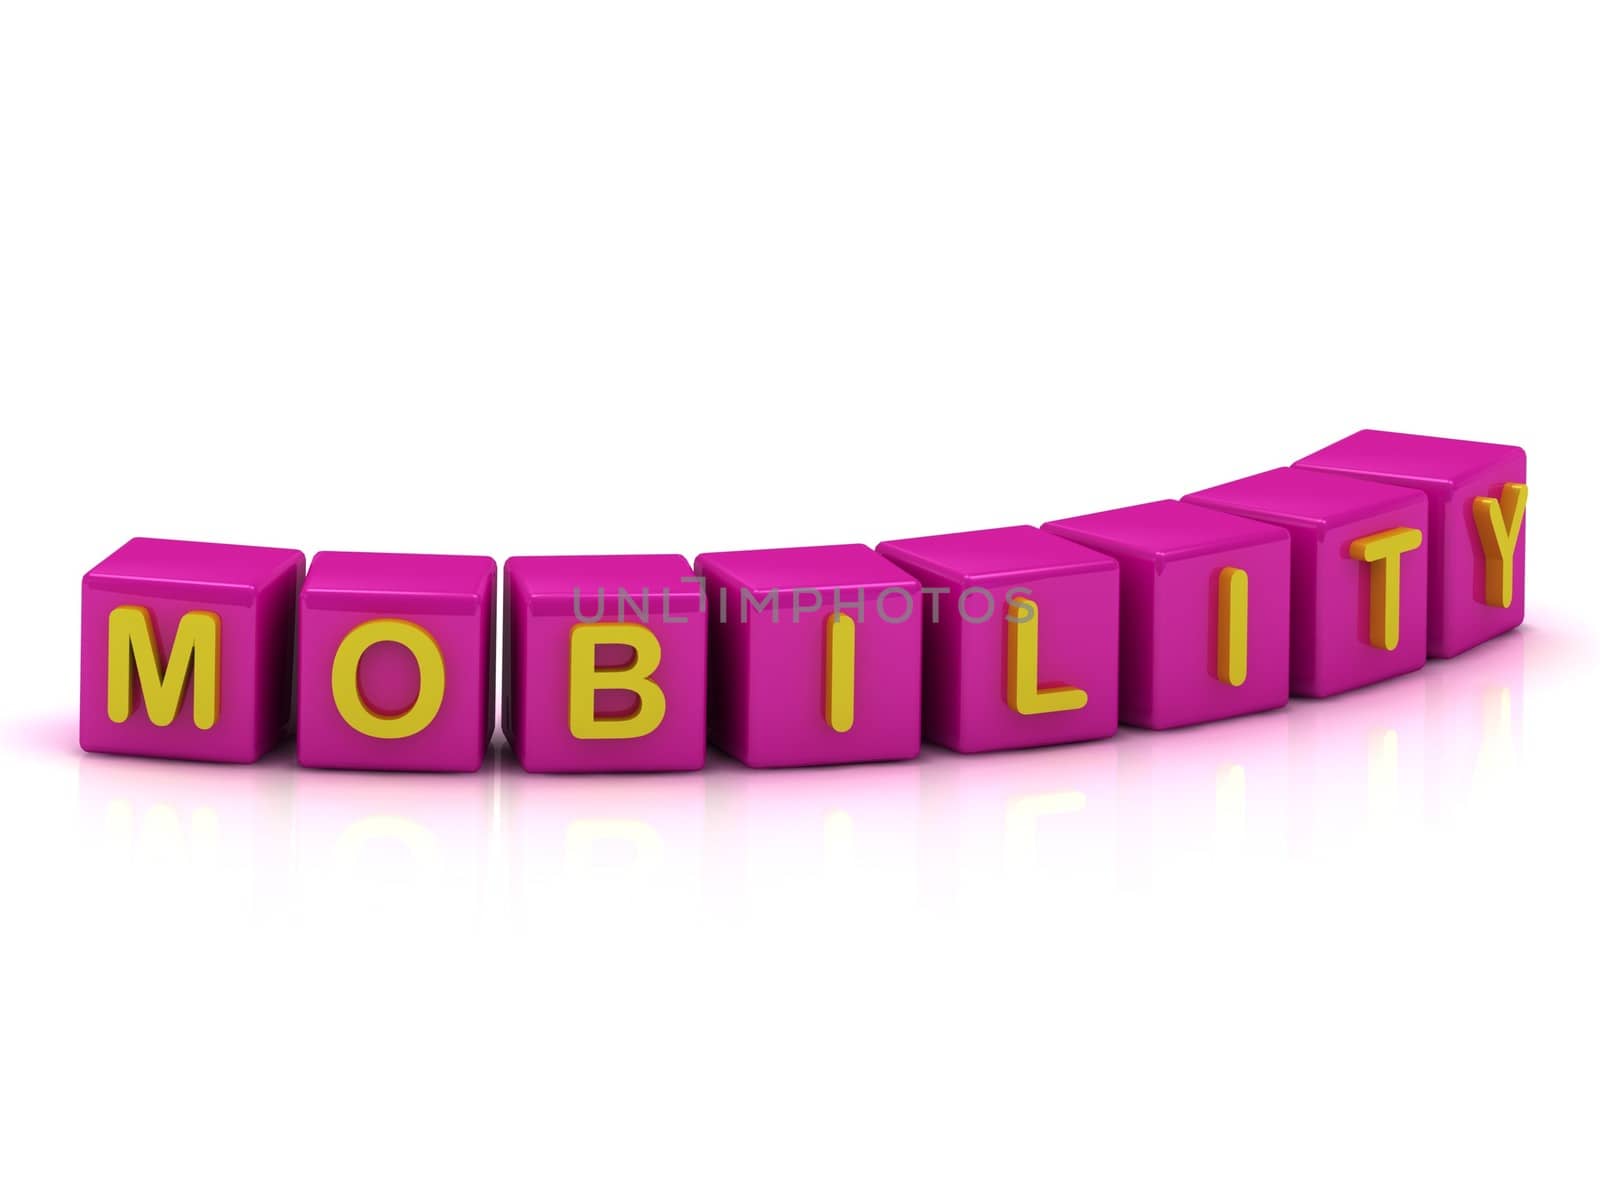 MOBILITY Inscription on the cubes of rose colour on a white background